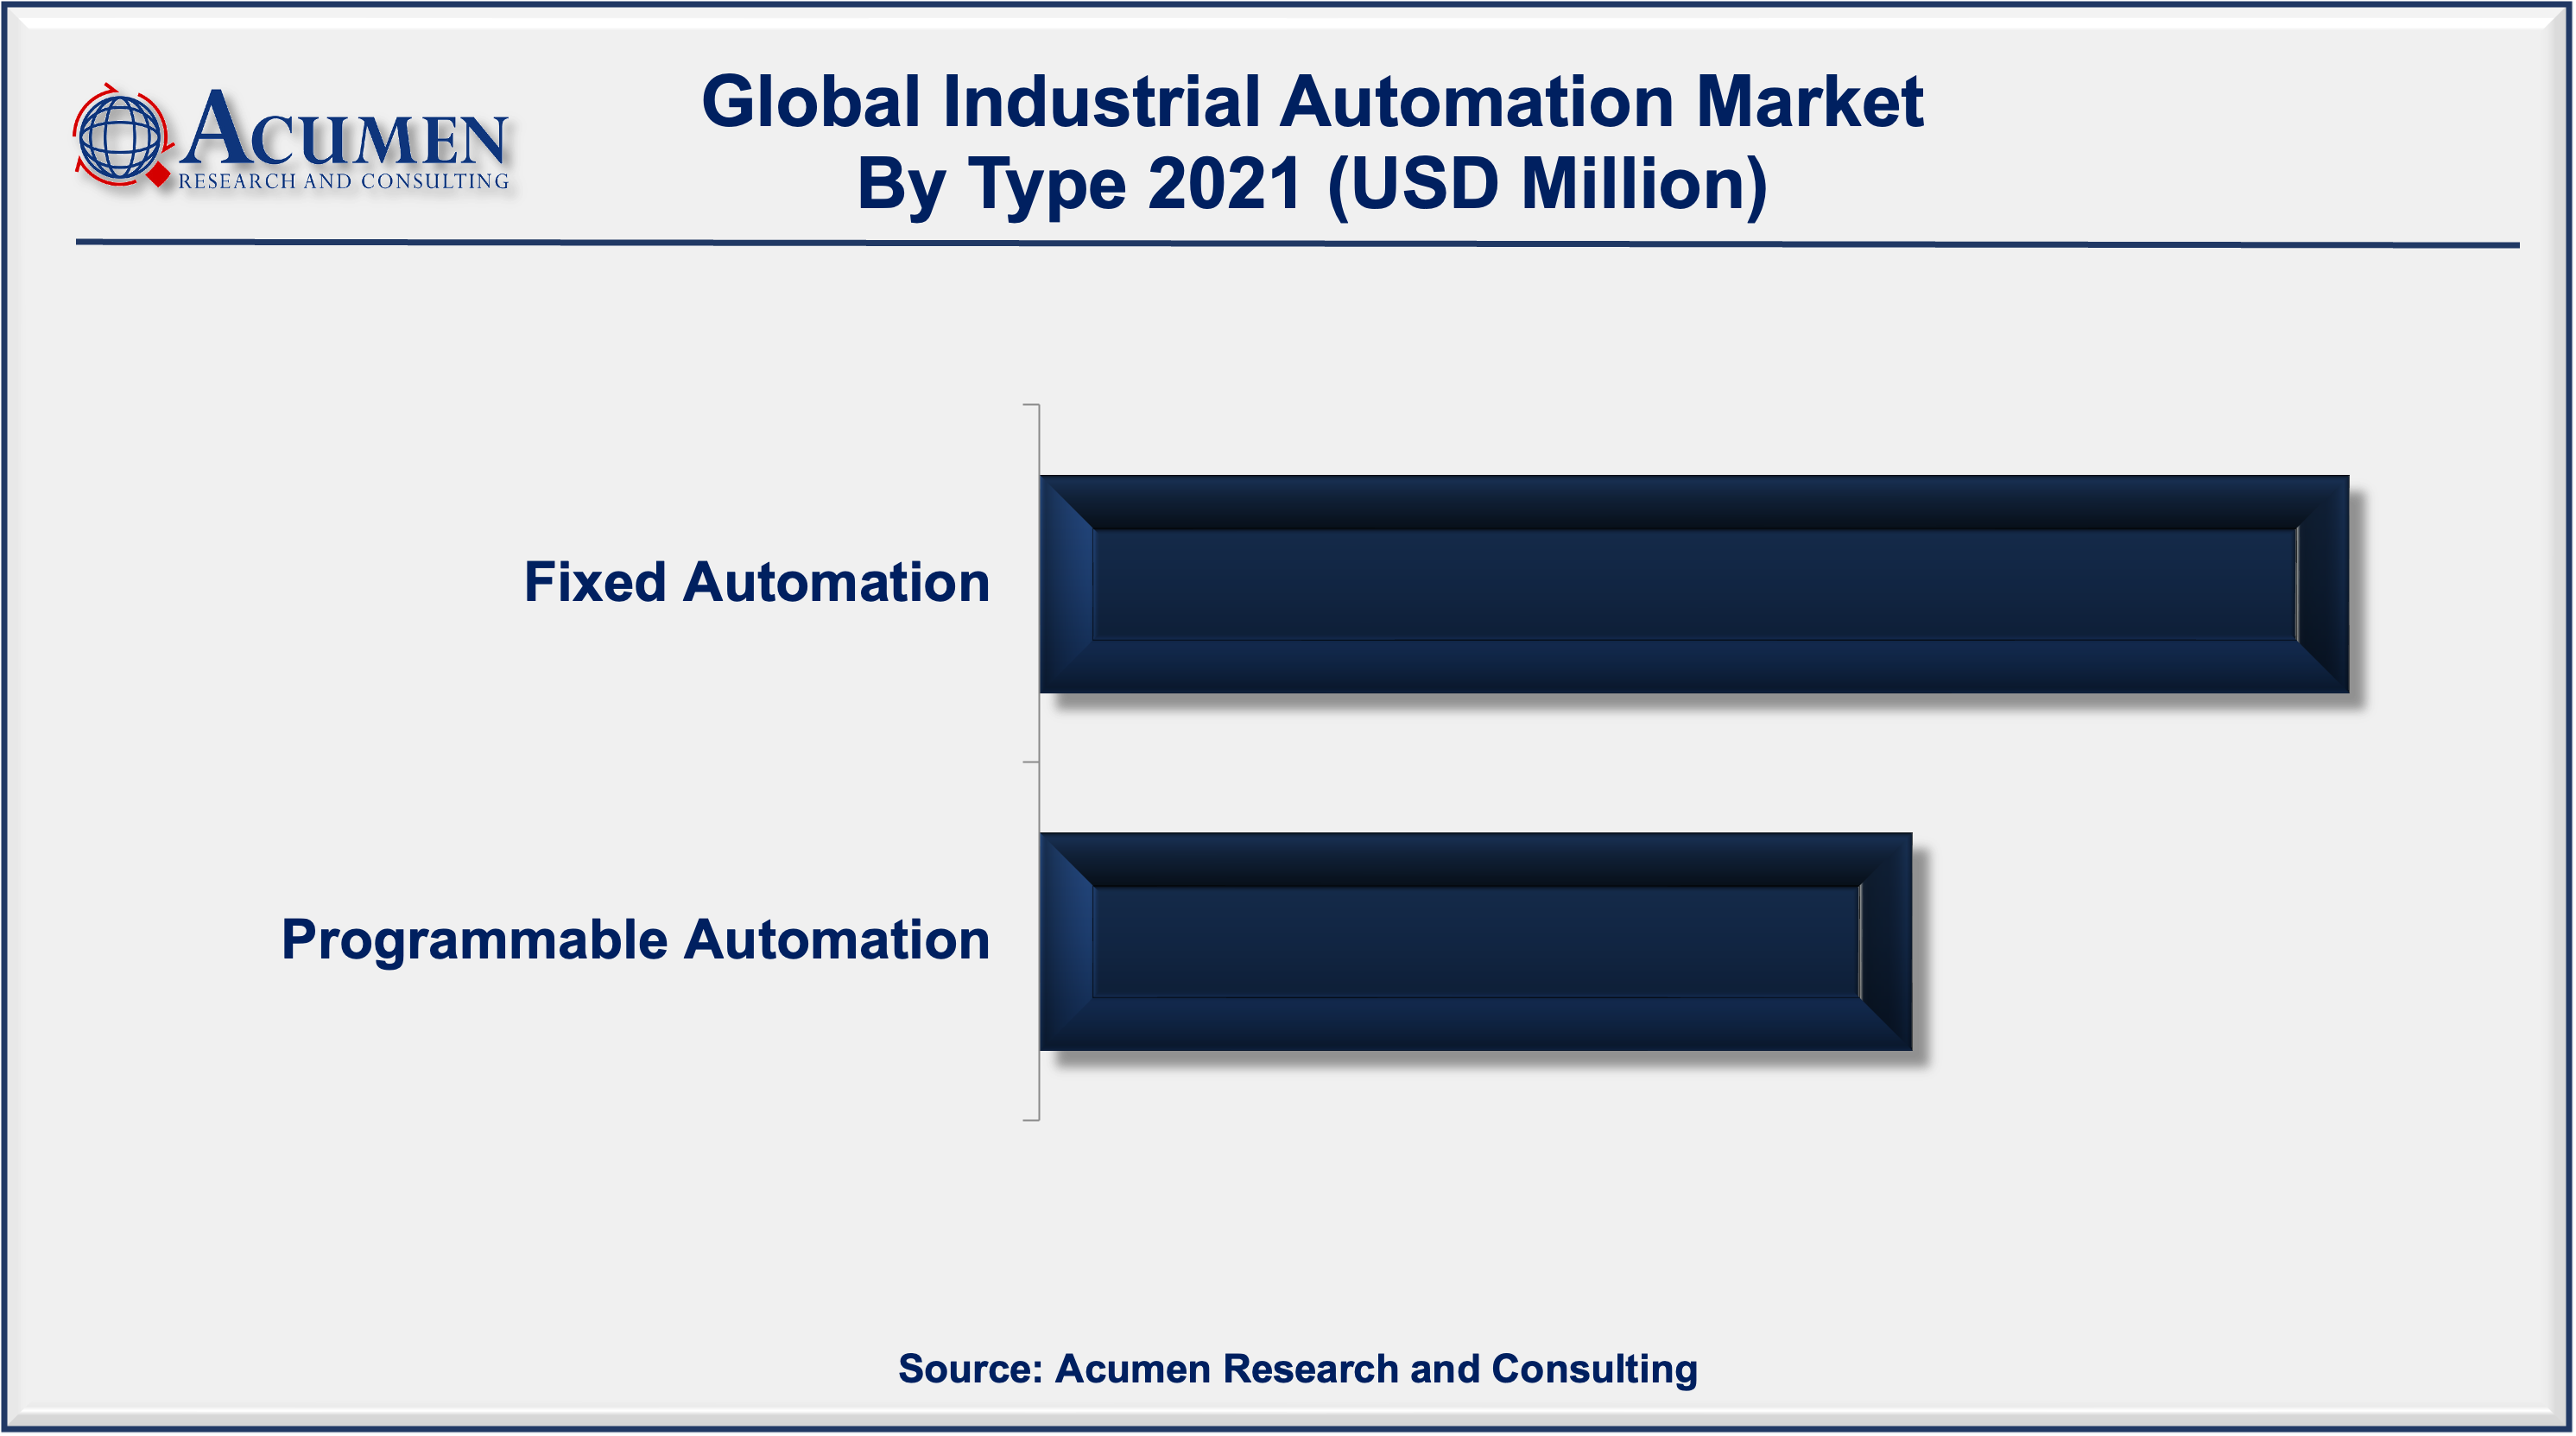 Industrial automation market size is expected to grow from USD 189.7 Billion in 2021 to USD 430.9 Billion by 2030.